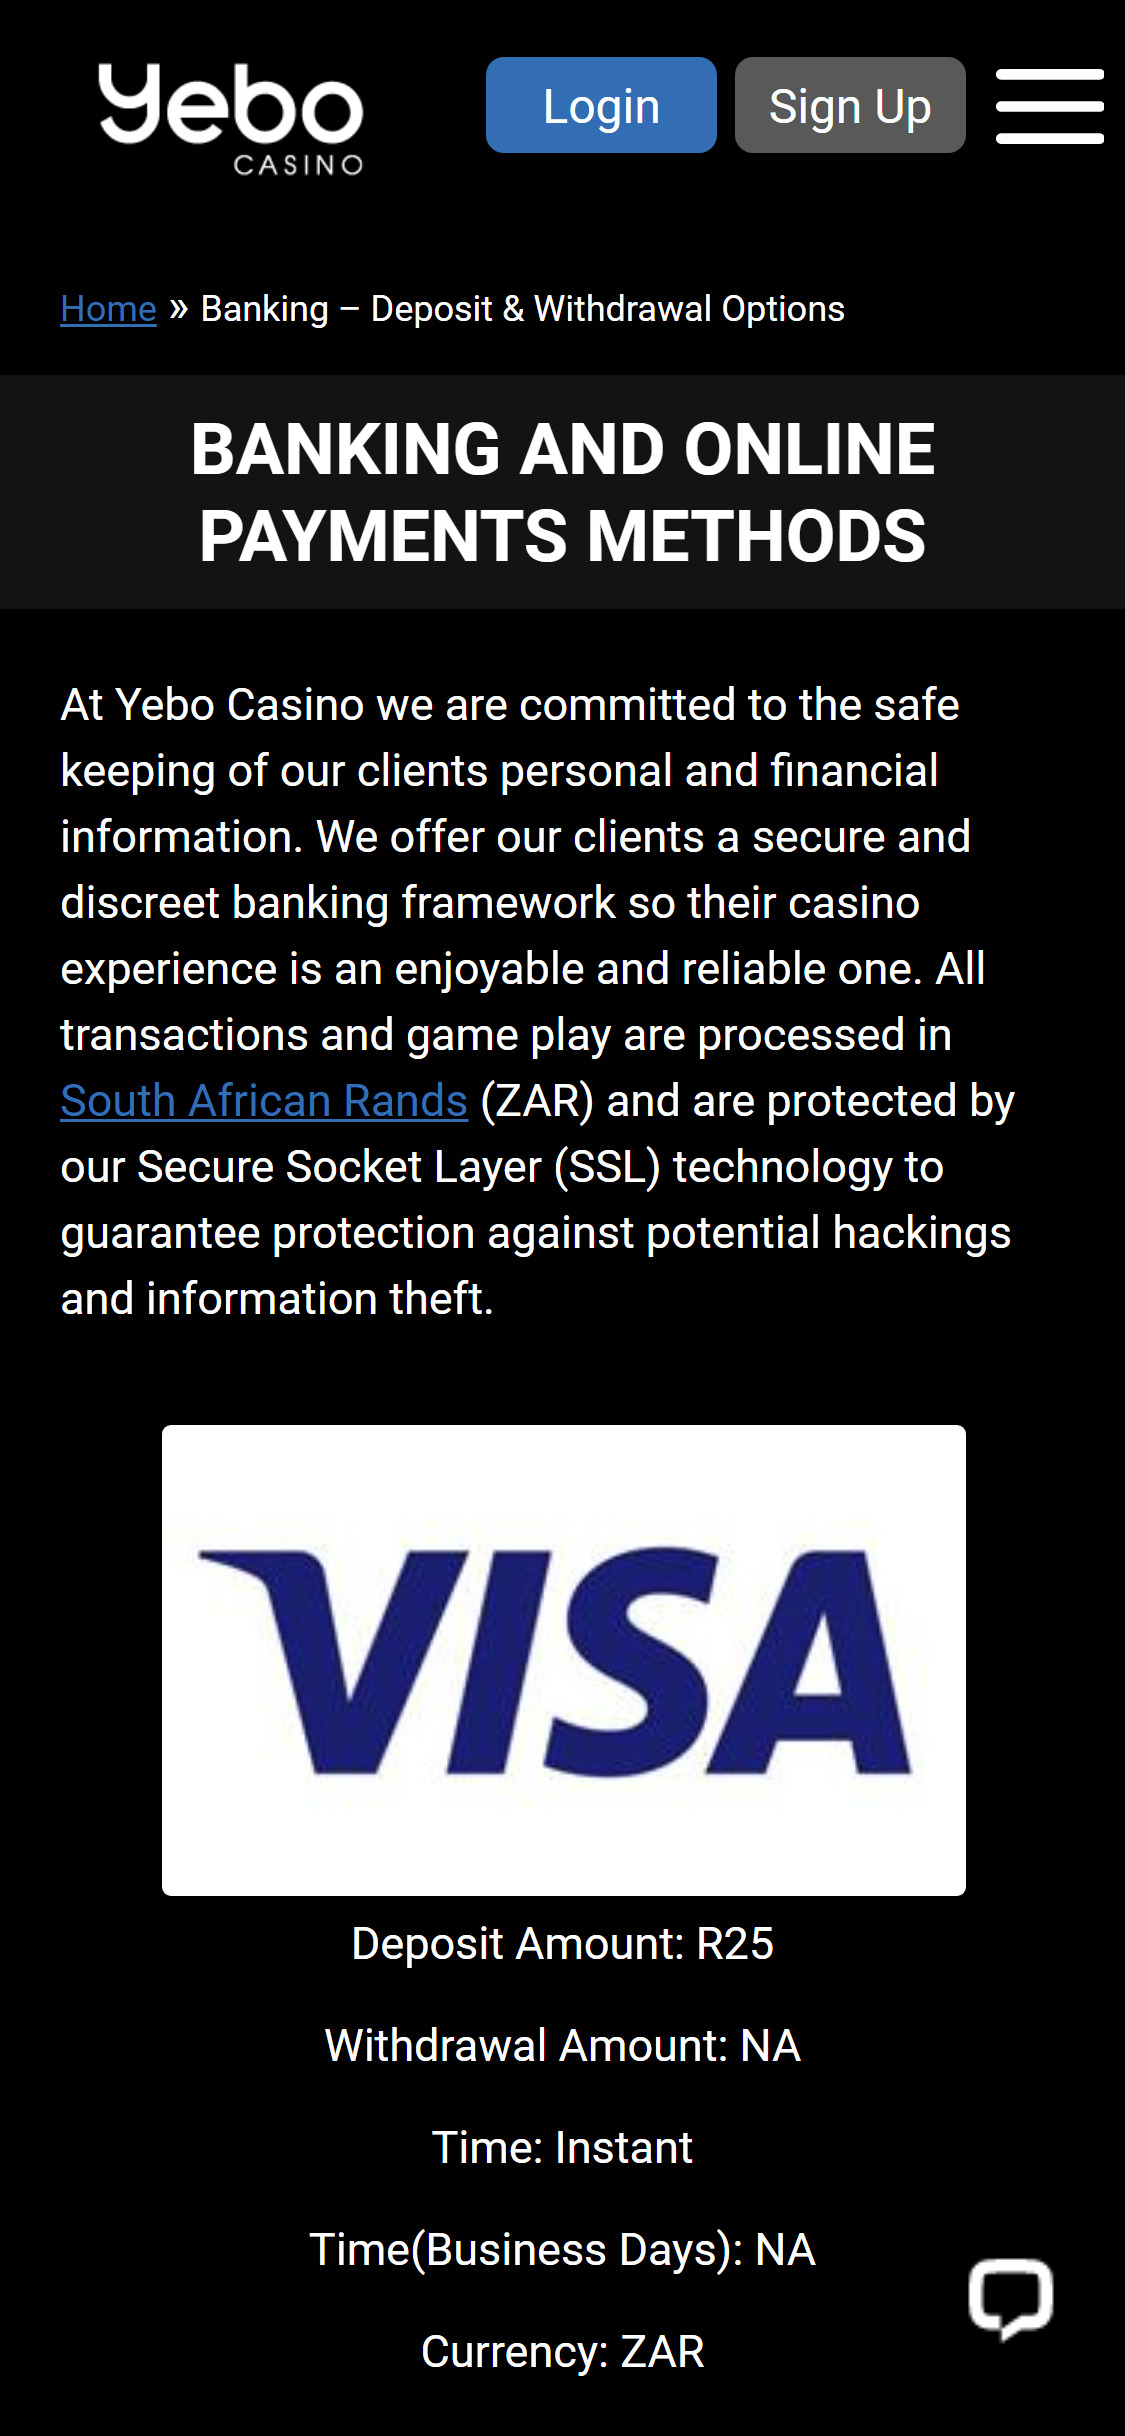 Yebo Casino Mobile Payment Methods Review